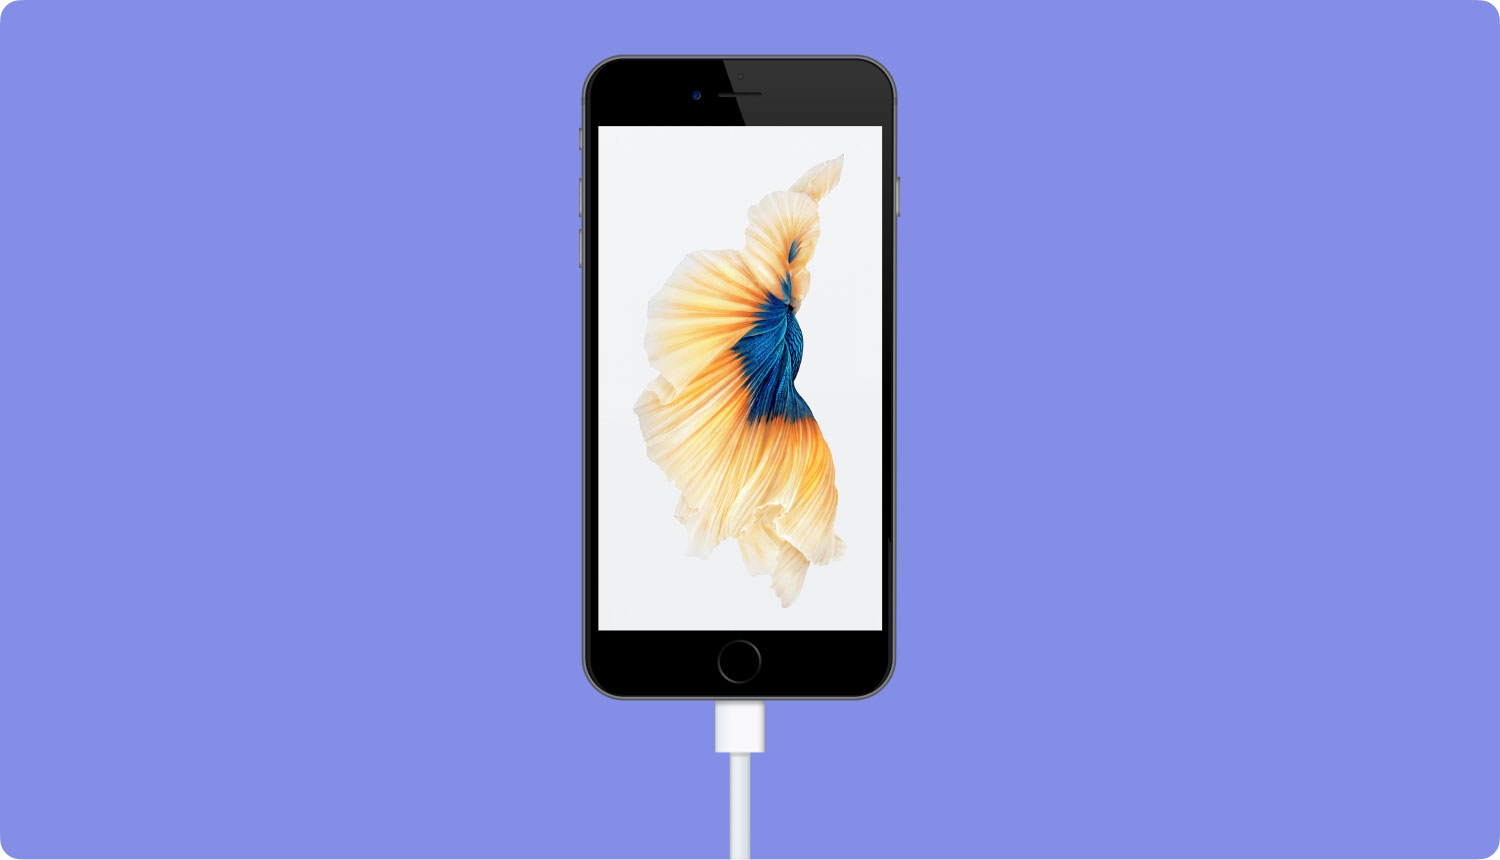 iphone-5s-problems-and-how-to-fix-them-even-the-blue-screen-of-death